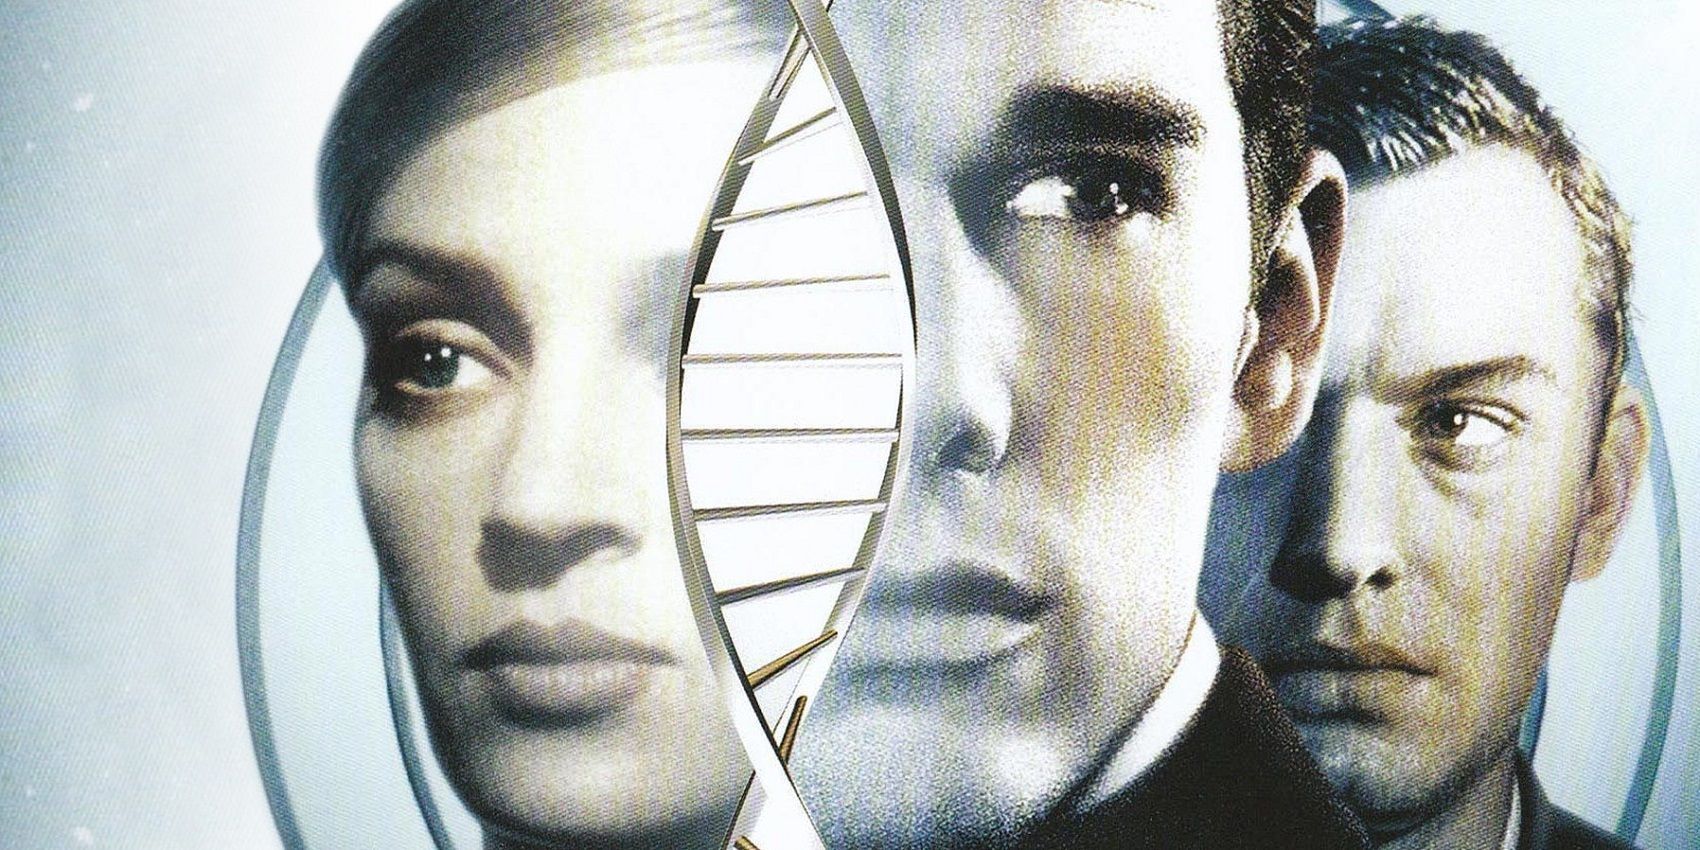 Gattaca: 10 Reasons It’s One Of The Most Enduring Sci-Fi Films Ever